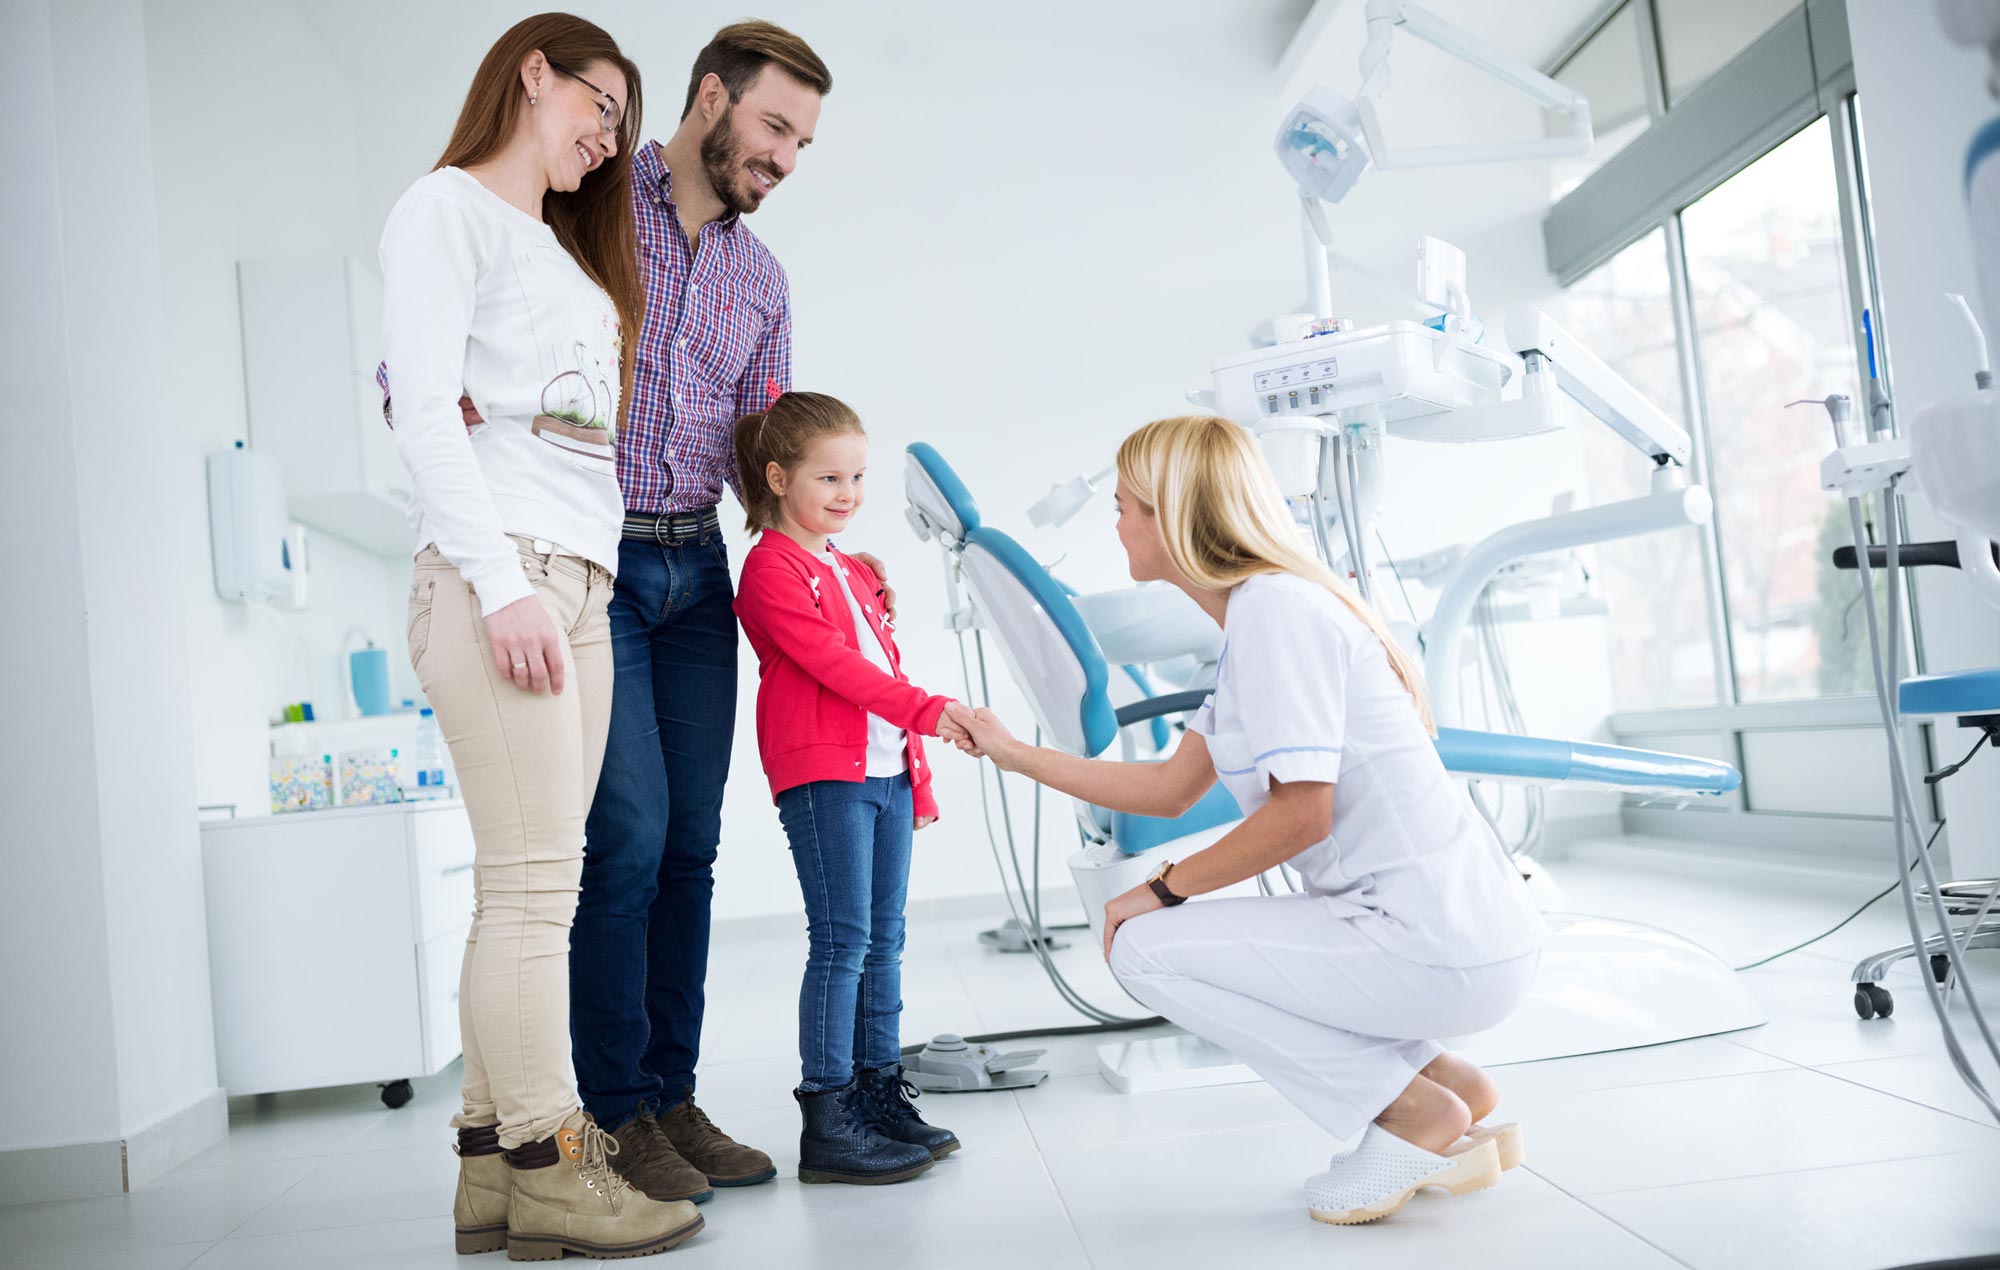 Crouching dental hygienist shaking hands with child in front of smiling parents